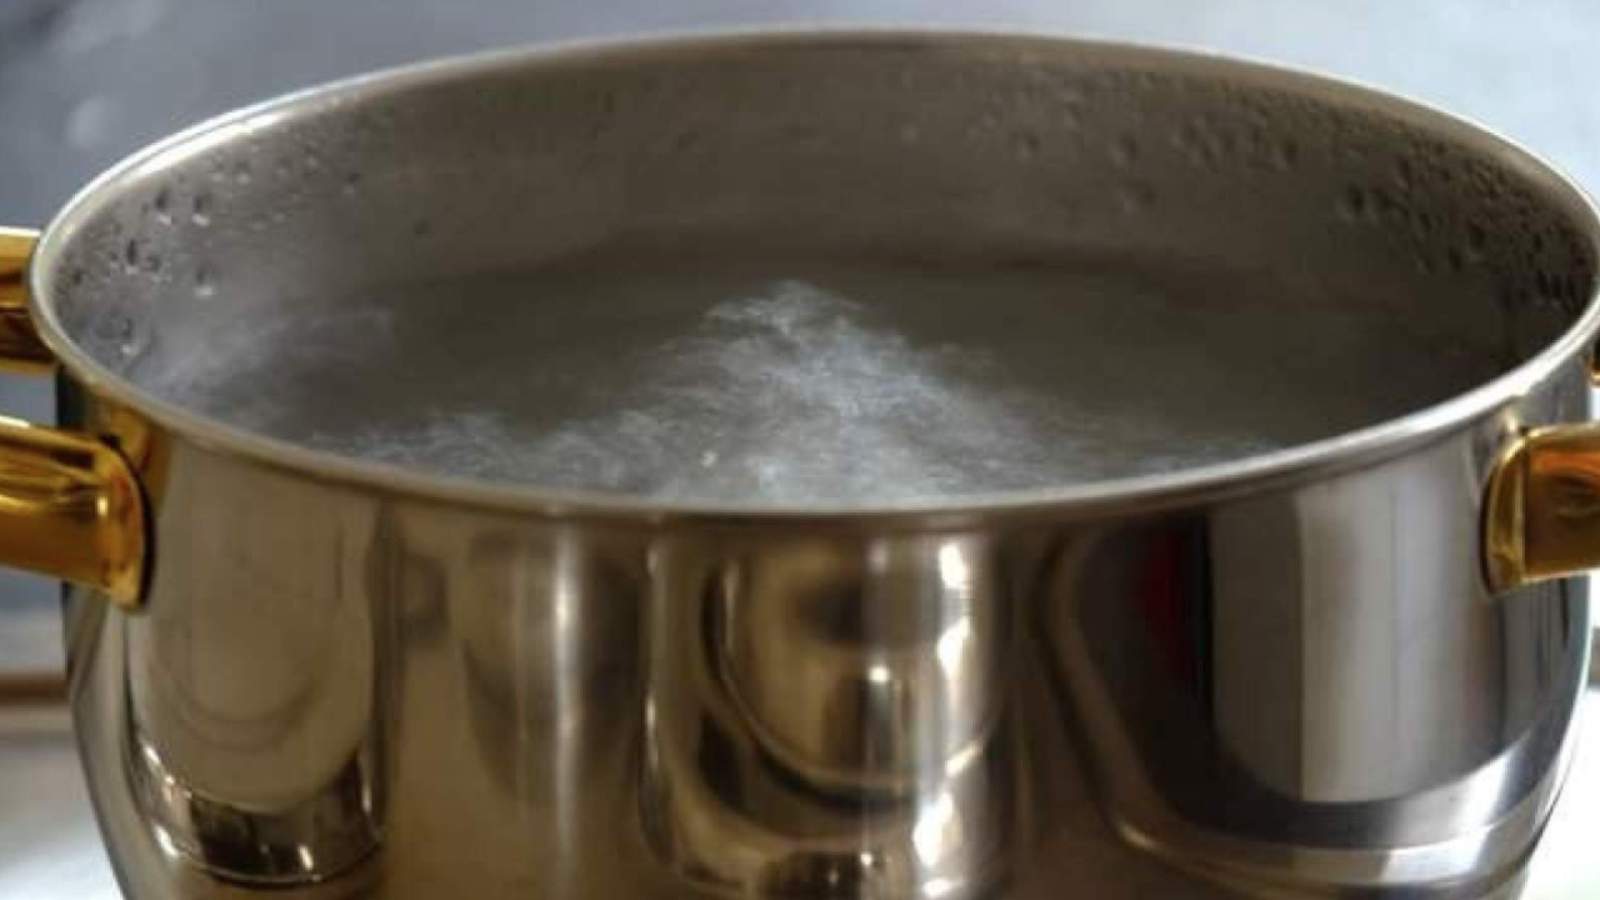 SAWS customers urged to boil water before drinking